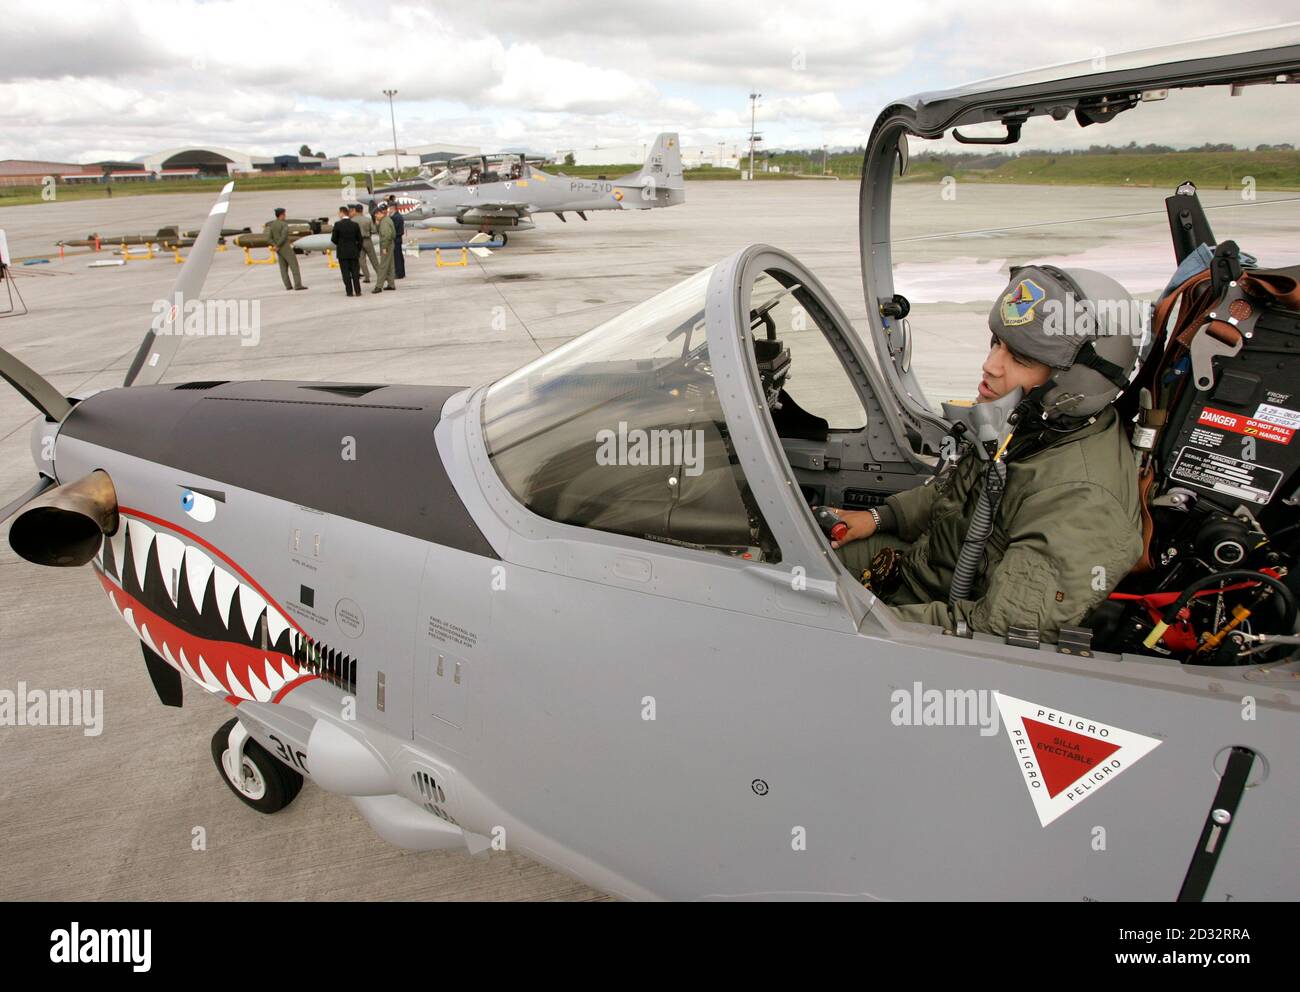 A Colombian airforce pilot sits in a Tucano turboprop plane at Bogota's military airport of Catam, December 14, 2006. Brazil delivered three military planes in Colombia in a move that Colombia's biggest rebel group characterized as meddling in its four-decade fight to establish a socialist state. The Super Tucano turboprop planes, made by Embraer, are part of a bigger order of 25 aircraft worth $235 million.  REUTERS/Jose Miguel Gomez         (COLOMBIA) Stock Photo